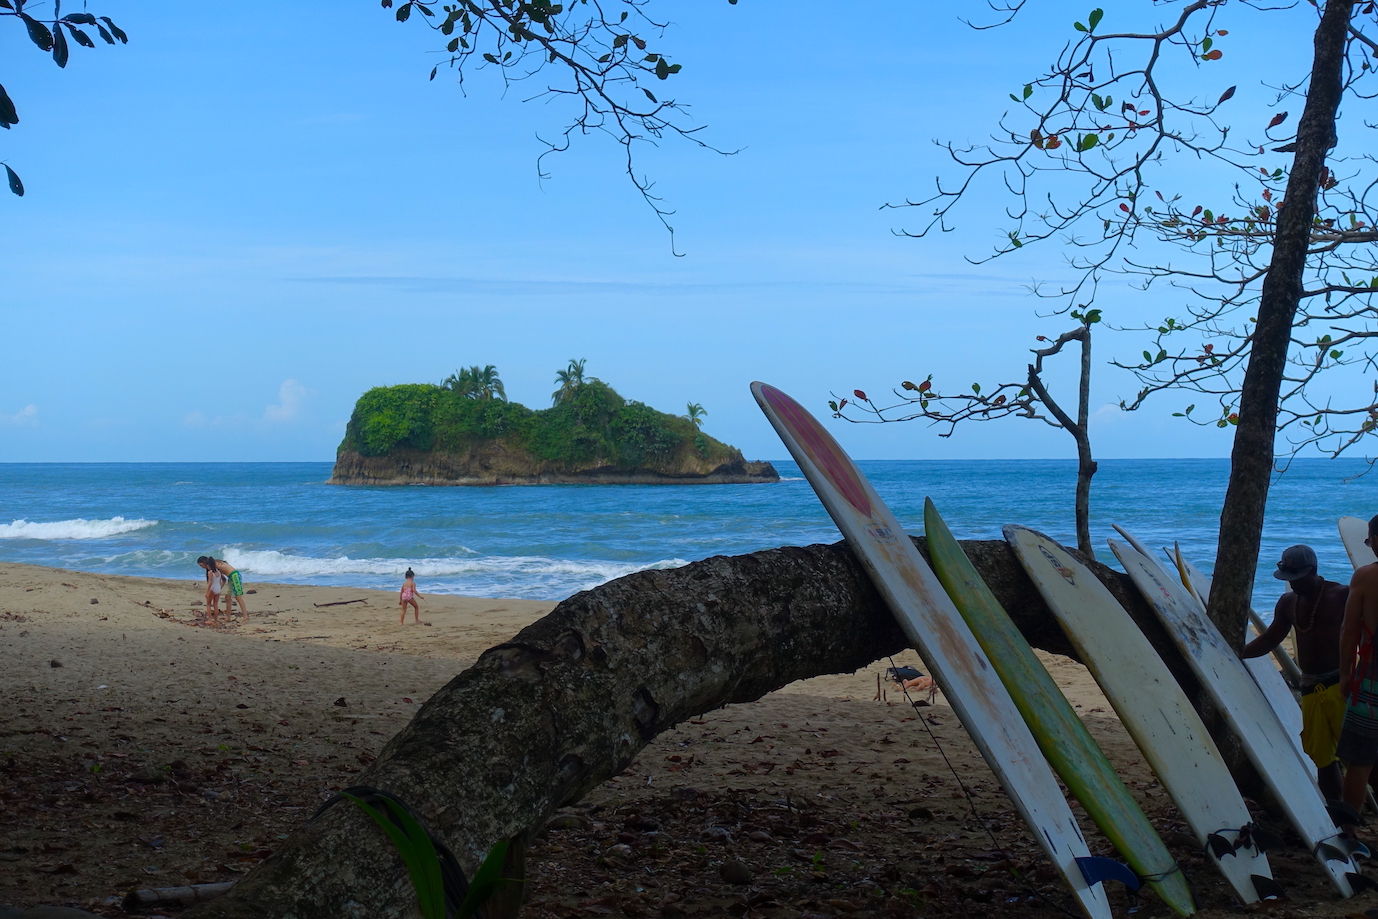 Playa Cocles one of the most popular beaches in Puerto Viejo. You can see some surfboards and the island close to the beach